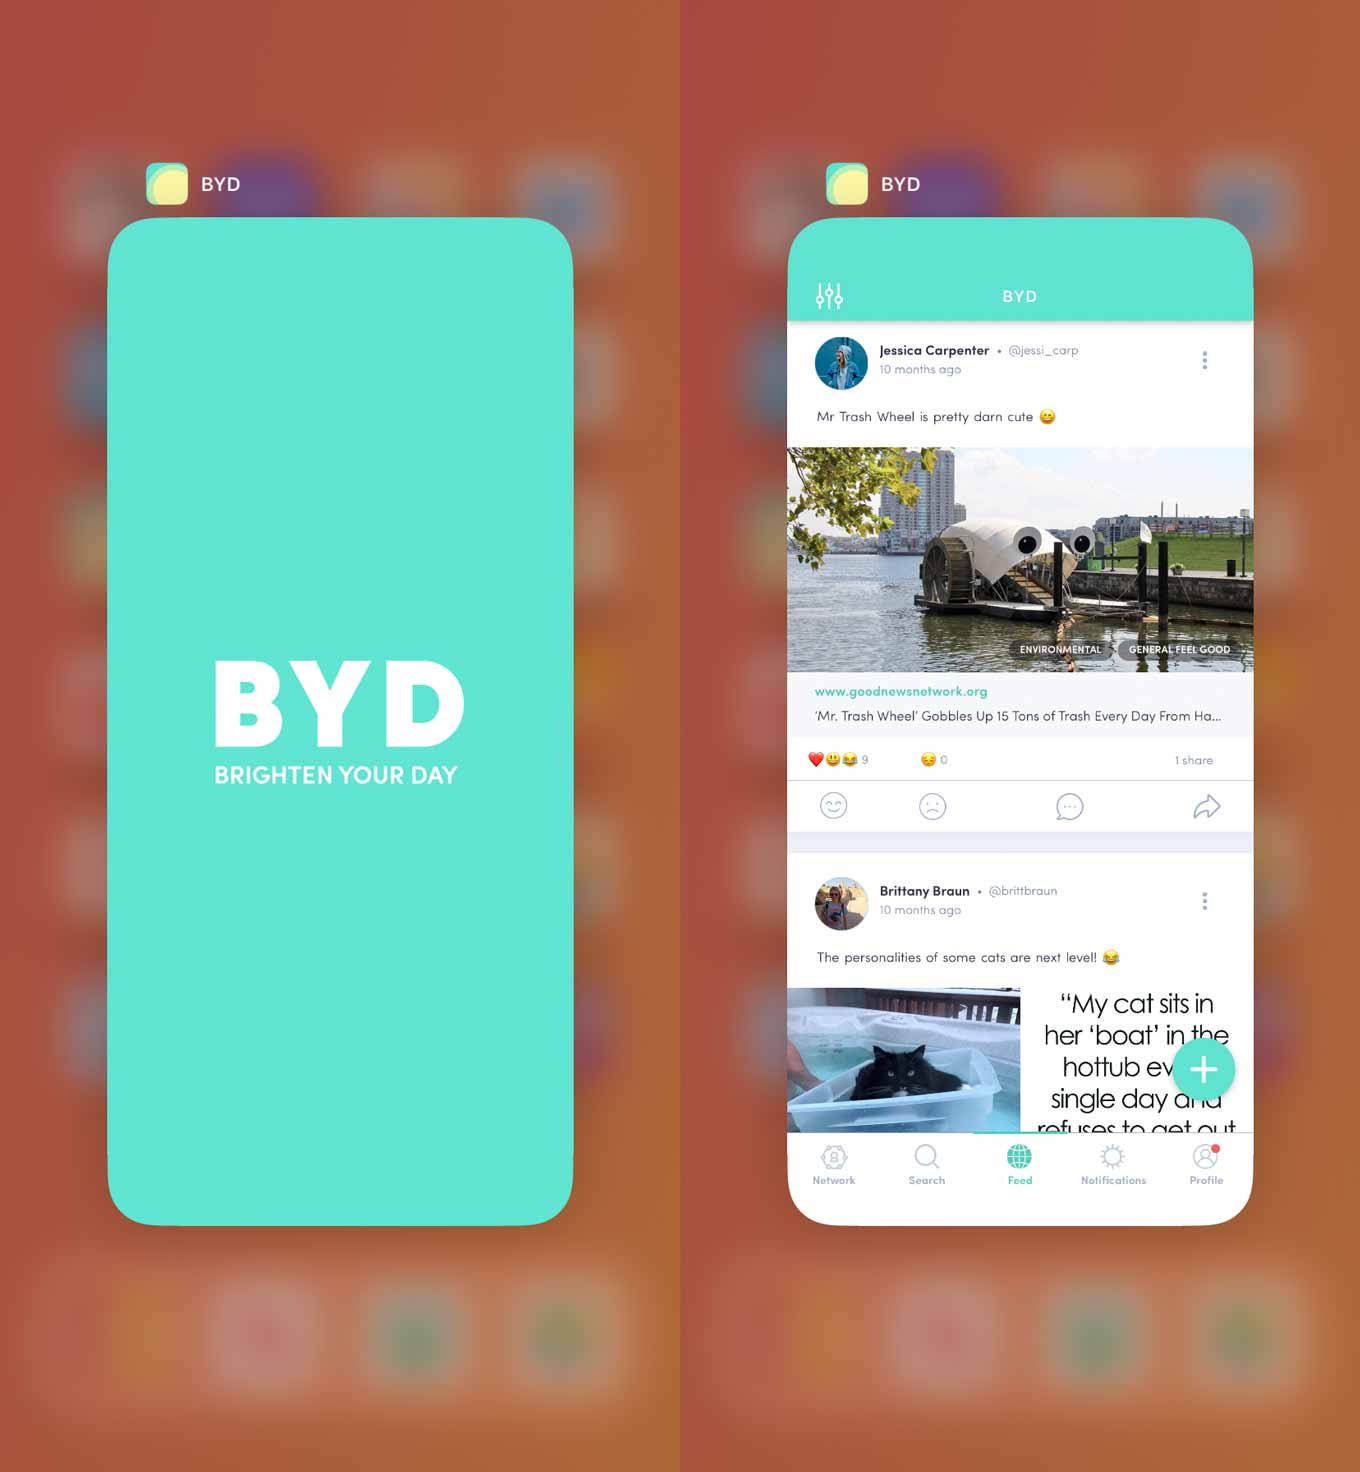 Good News App Brighten Your Day, showing a social media feel filled with happy news